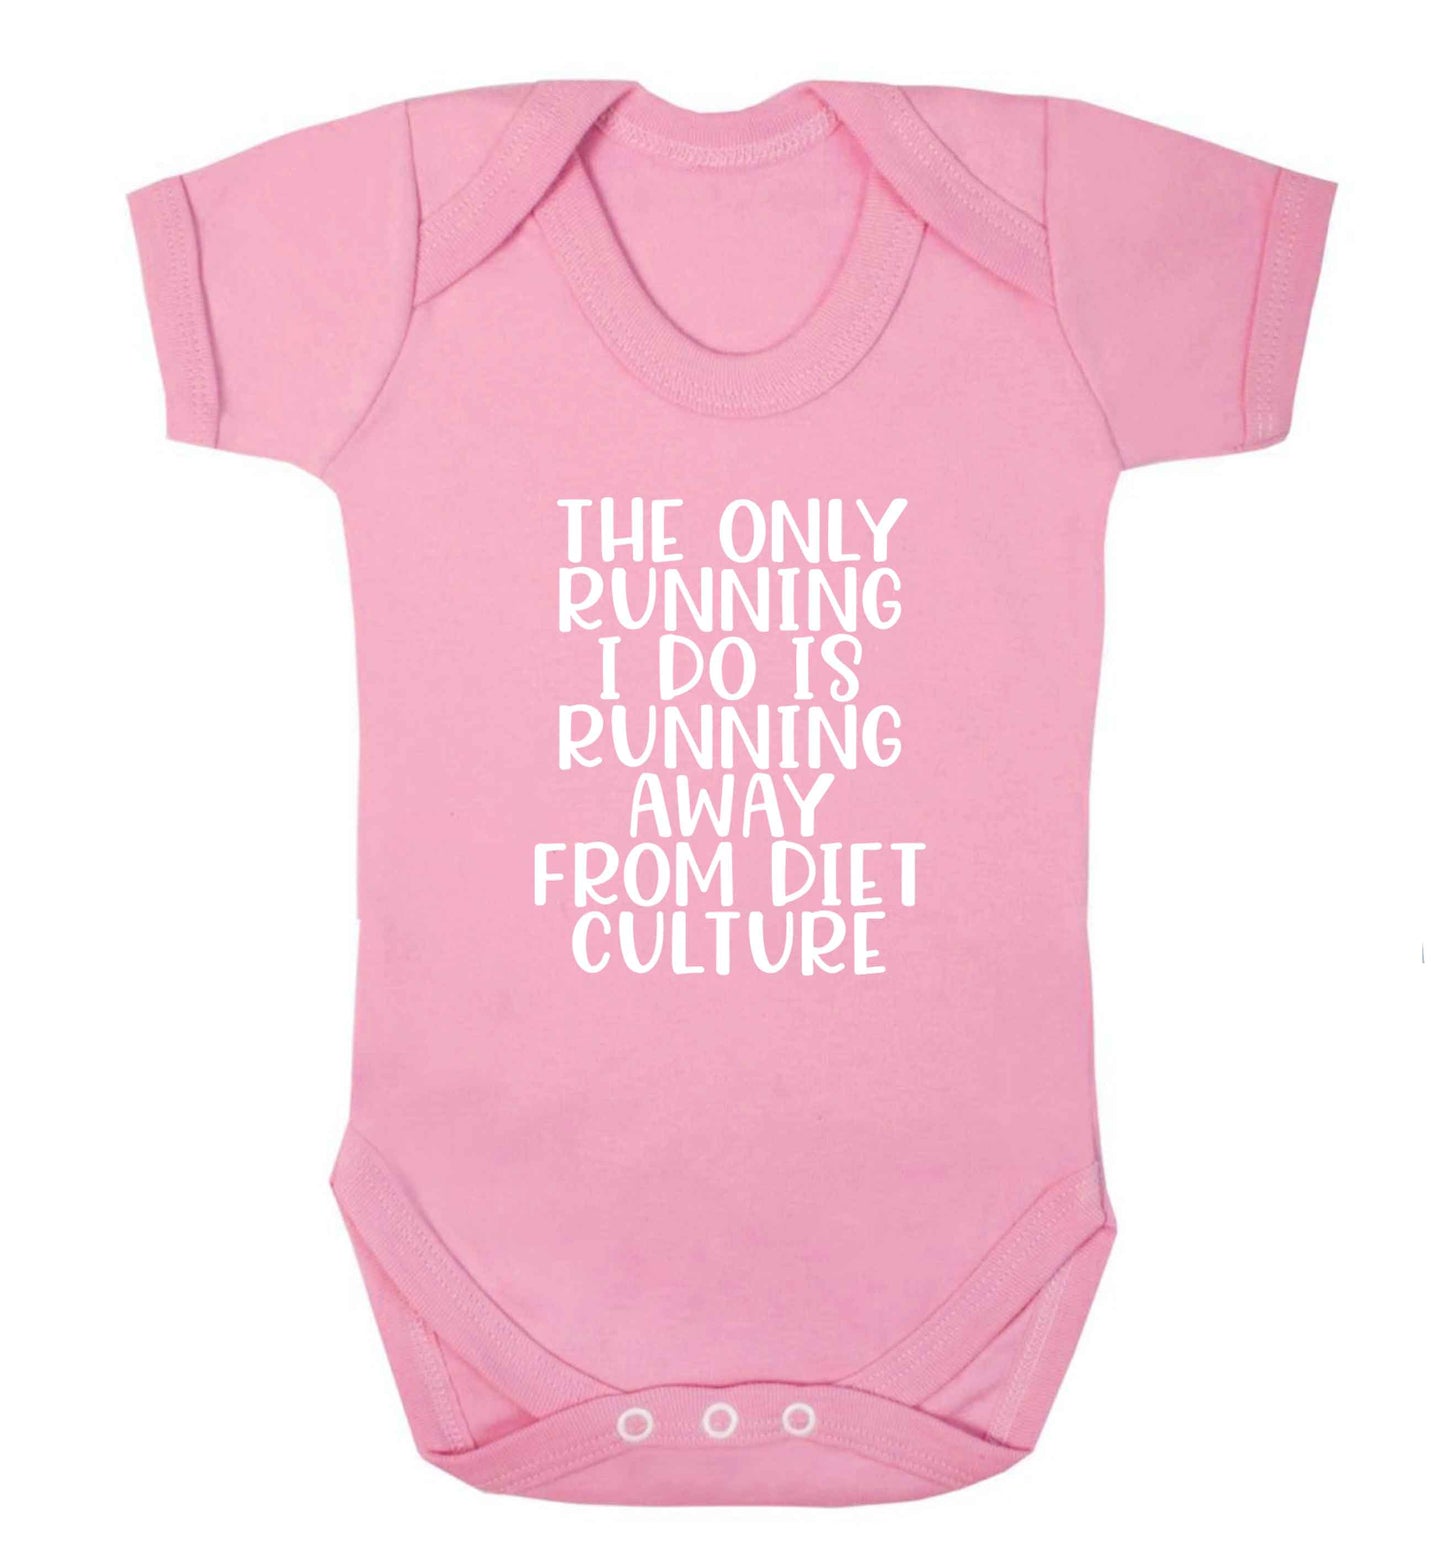 The only running I do is running away from diet culture baby vest pale pink 18-24 months